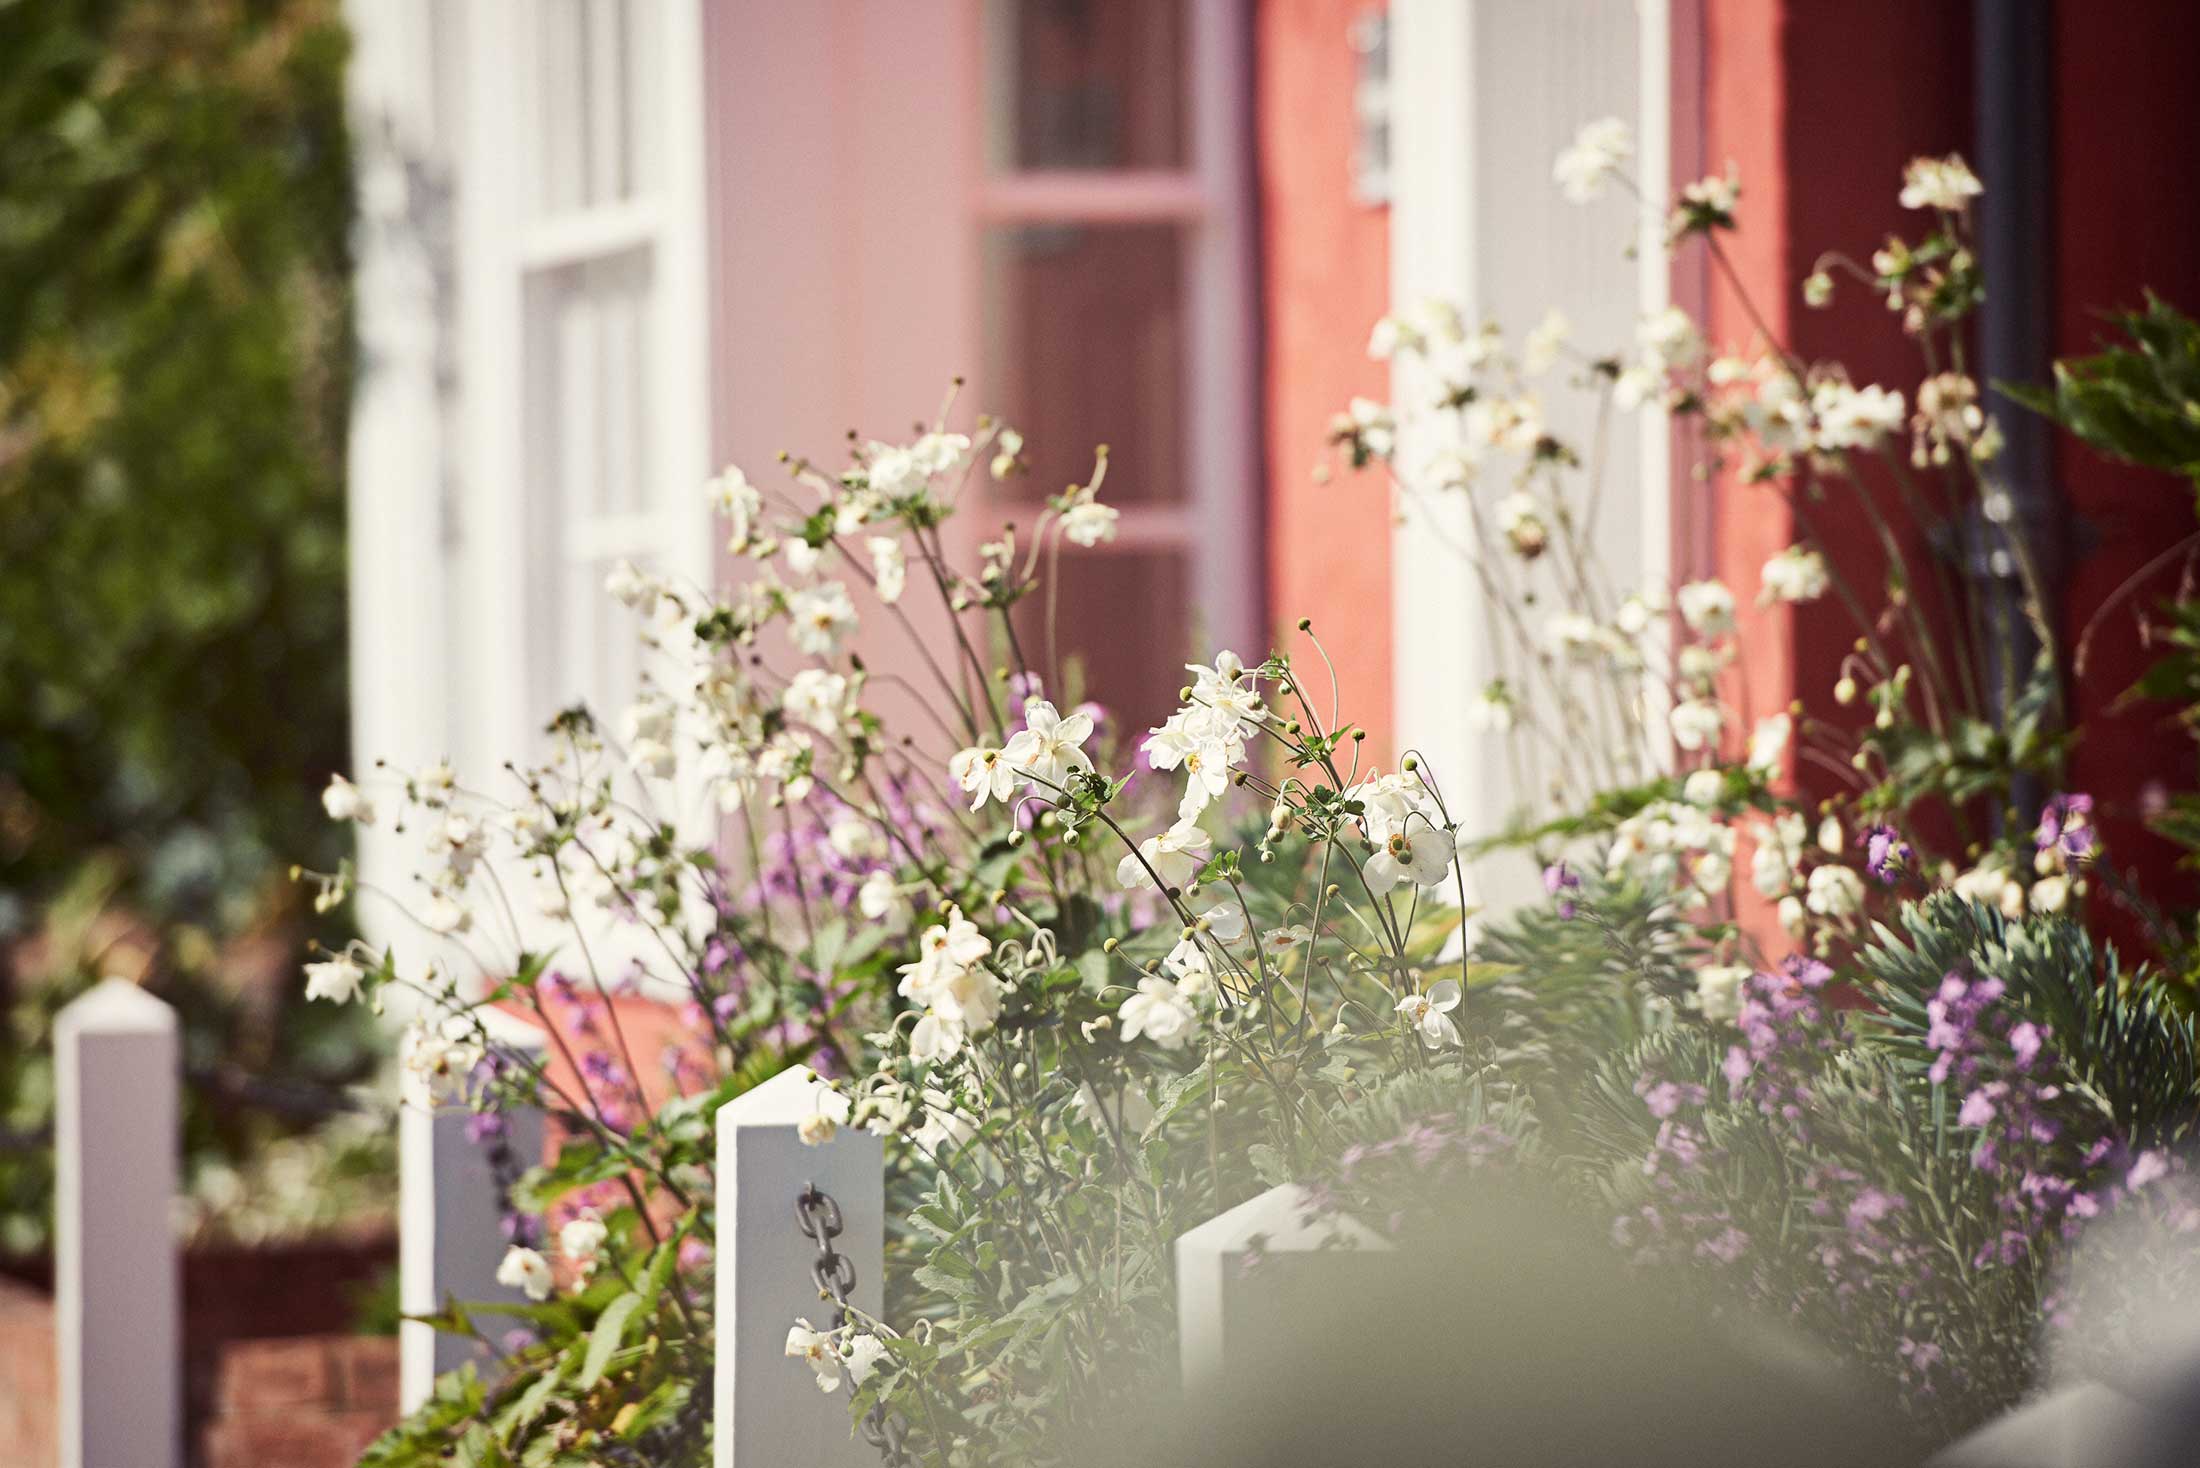 Flowers in front of colourful houses - Dedham - Beresfords Estate agents - Essex